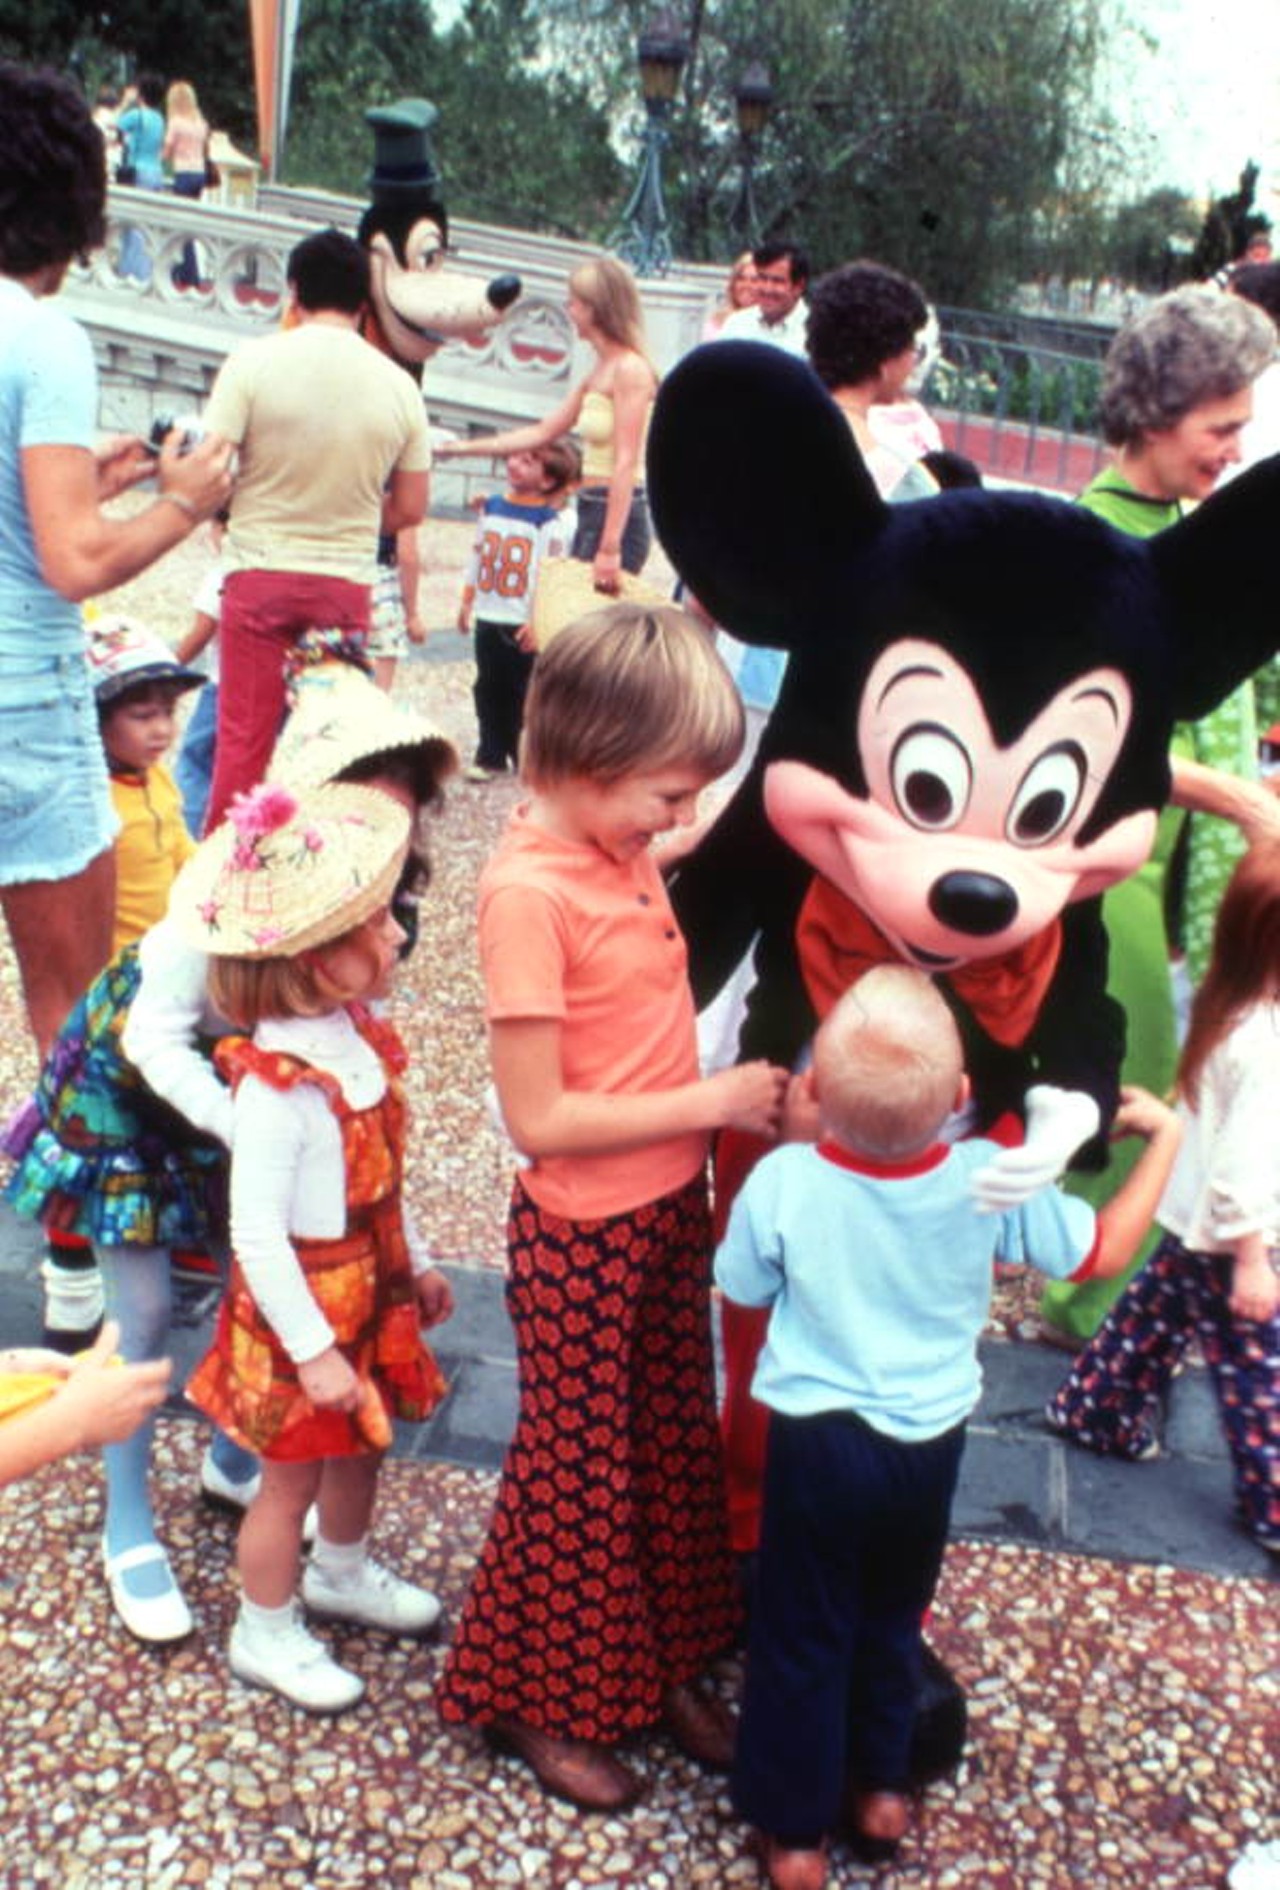 Children (wearing groovy bellbottoms) meeting Mickey Mouse at the Magic Kingdom amusement park in Orlando, Florida, 1977